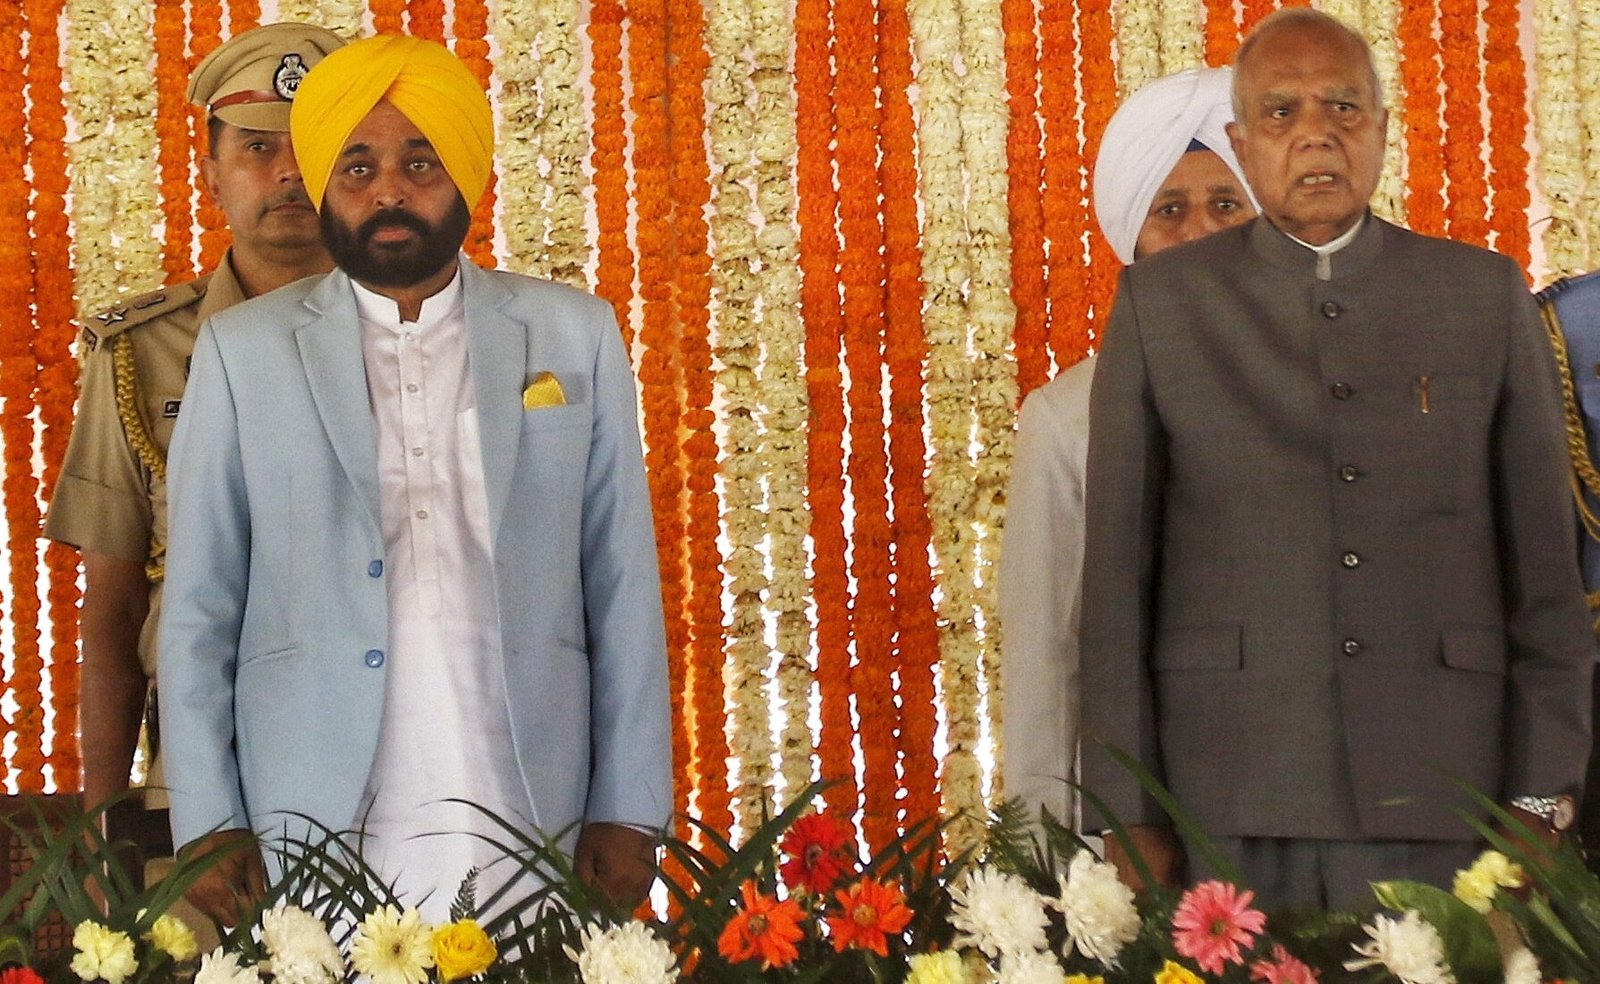 AAP leader Bhagwat Mann with Punjab Governor Banwarilal Purohit during his oath taking ceremony